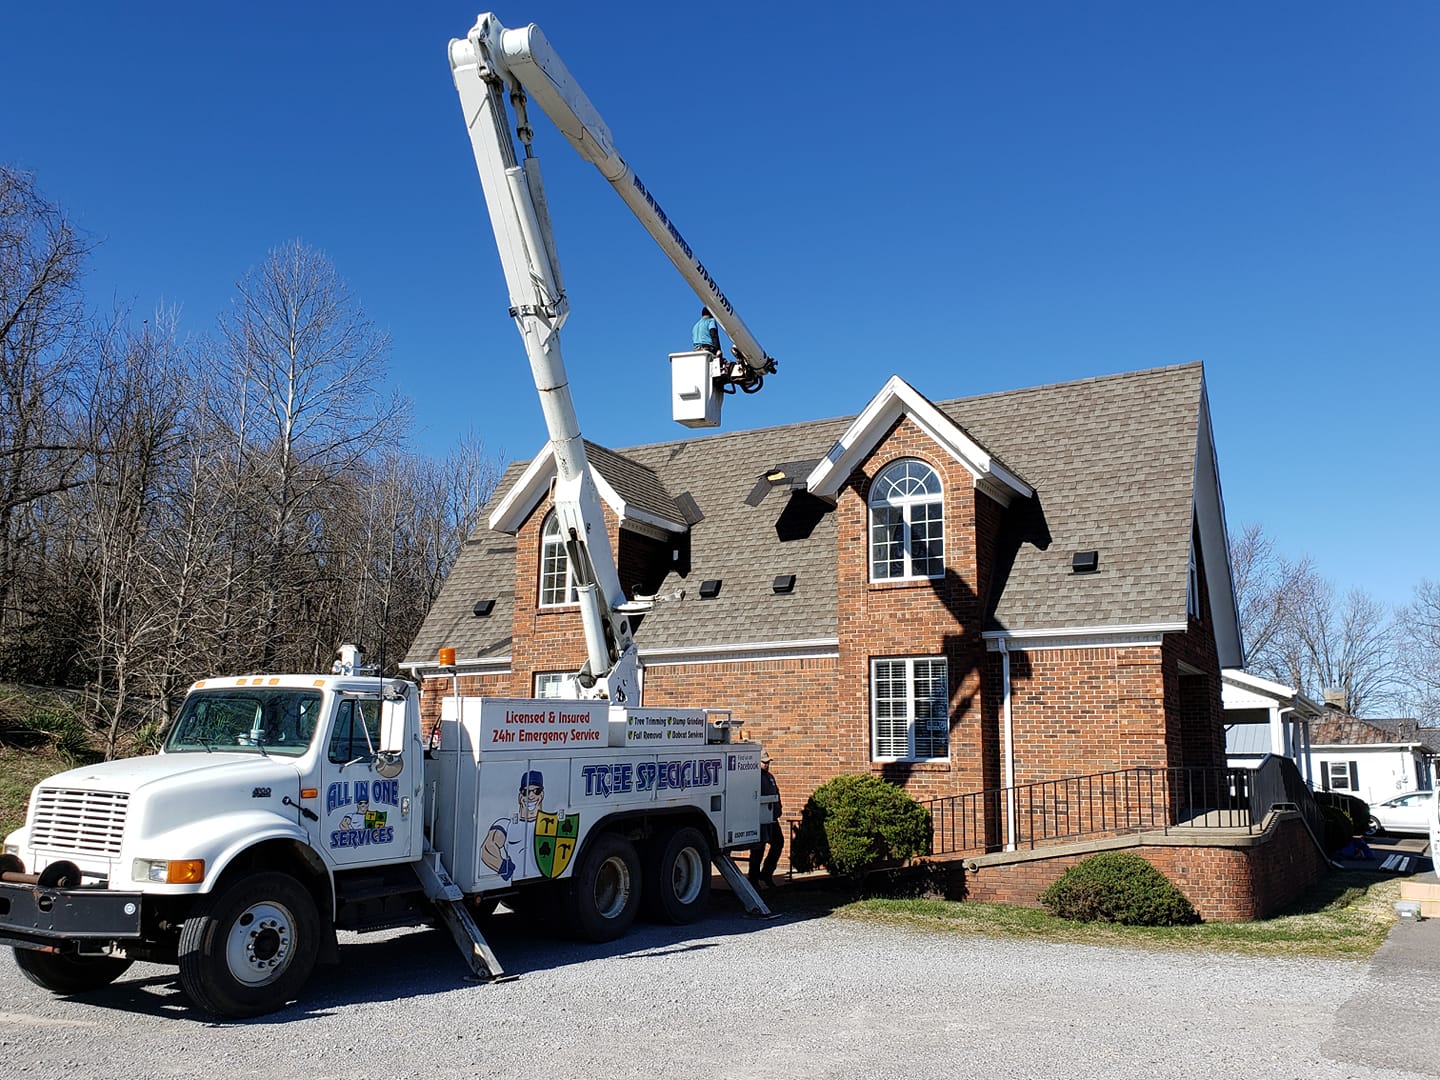 Service Truck Lifter | Greenville, KY | All In One Services LLC